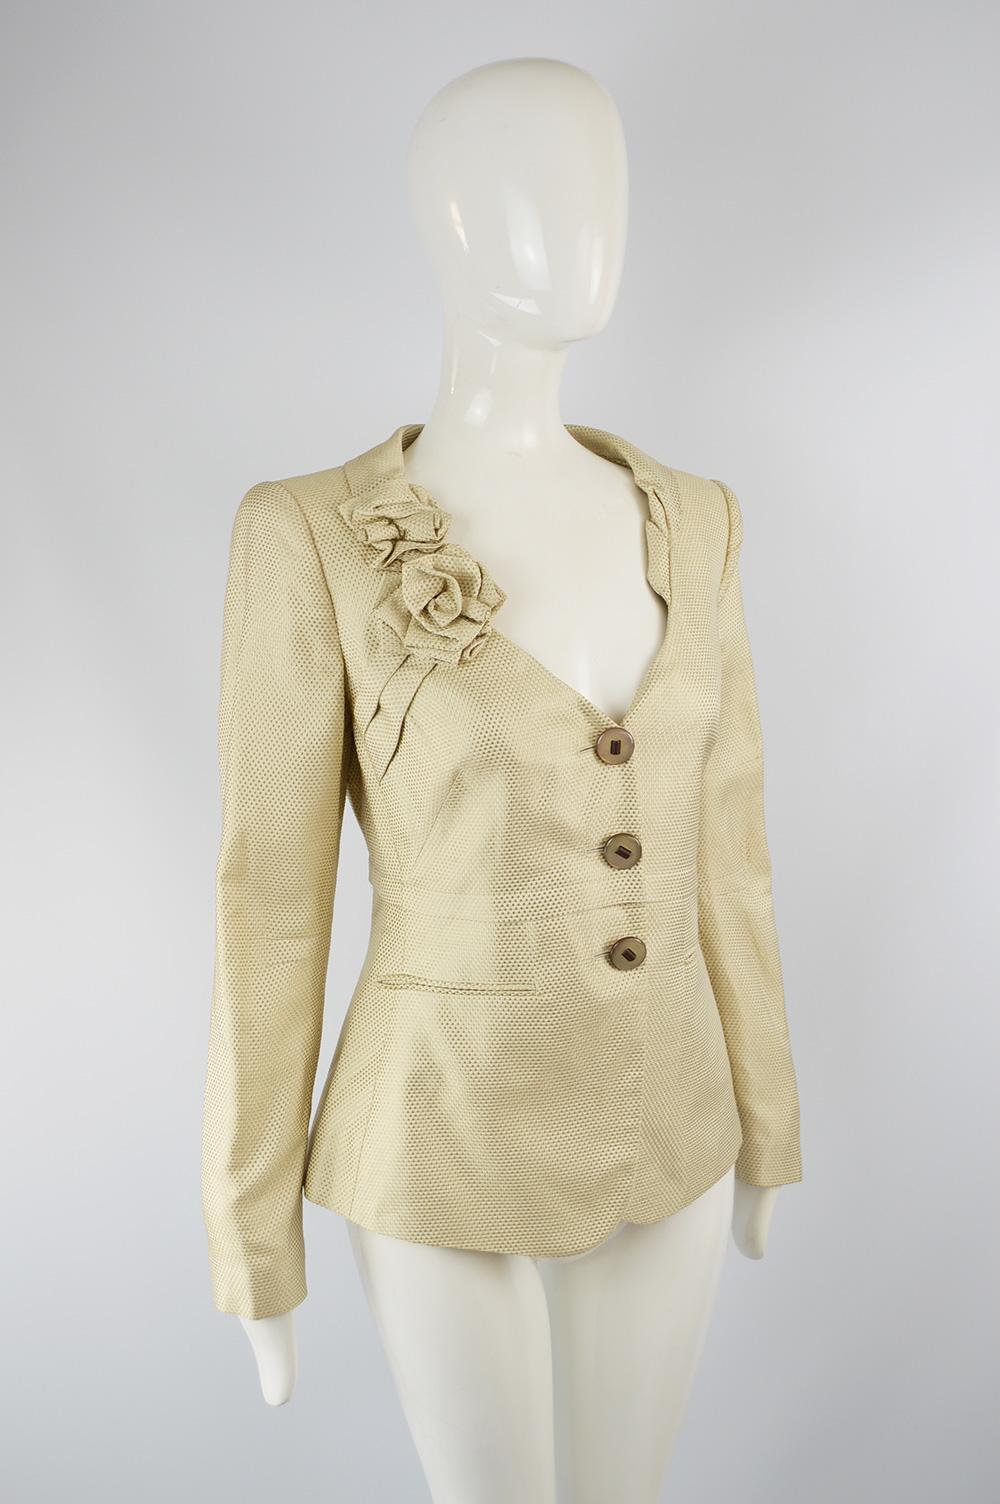 Giorgio Armani Cream Brocade Jacquard Jacket with Origami Flower Lapel In Good Condition For Sale In Doncaster, South Yorkshire